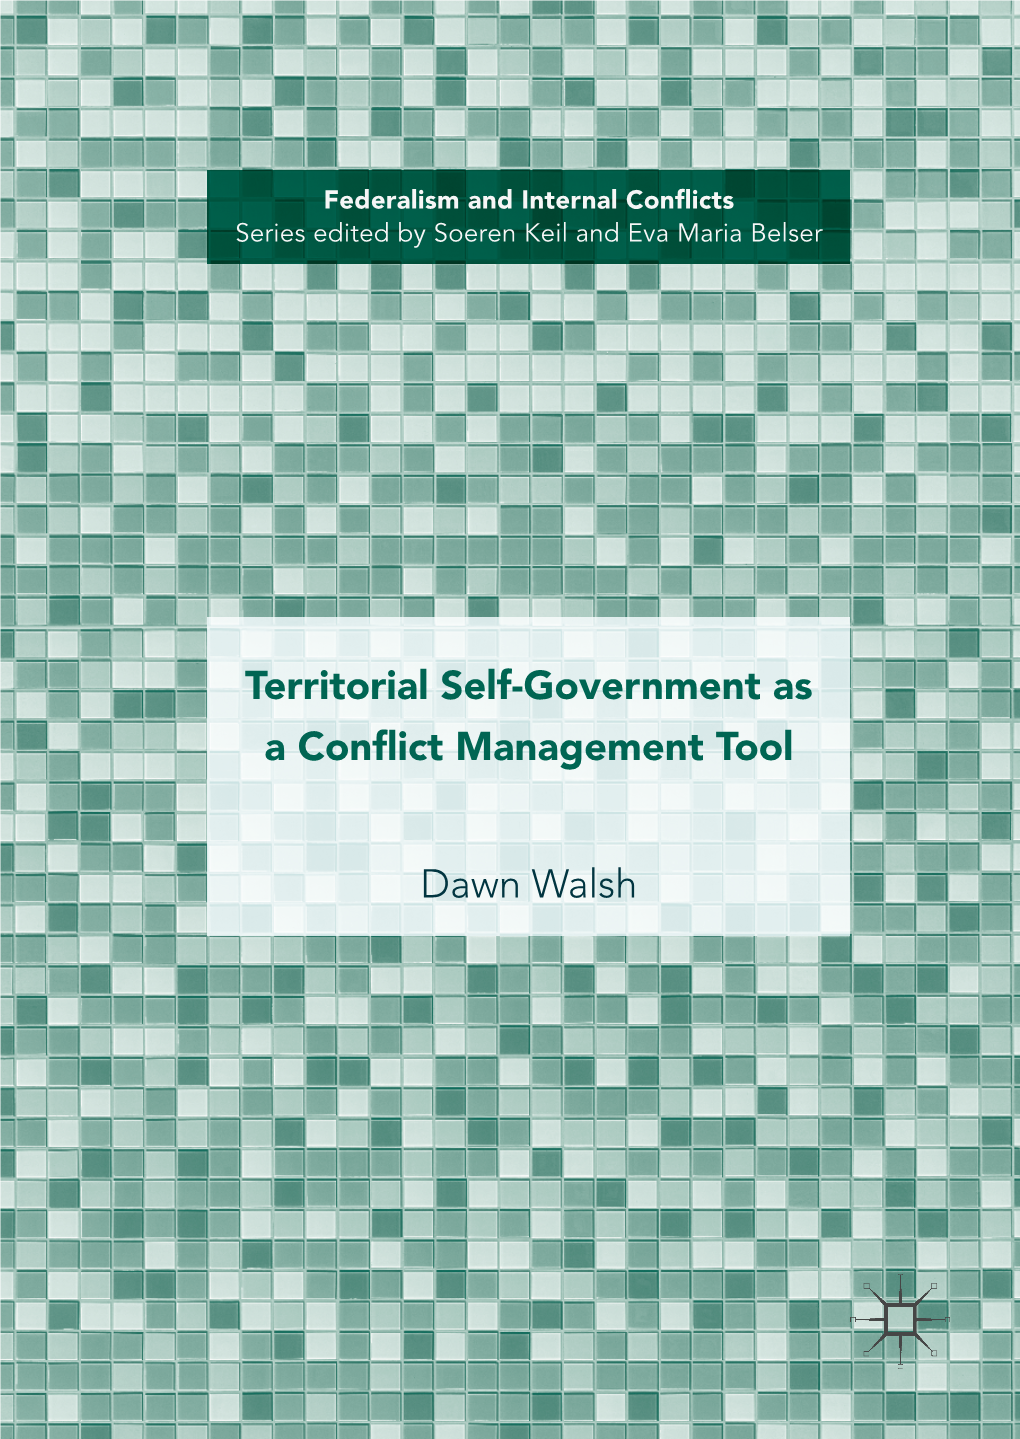 Territorial Self-Government As a Conflict Management Tool Dawn Walsh